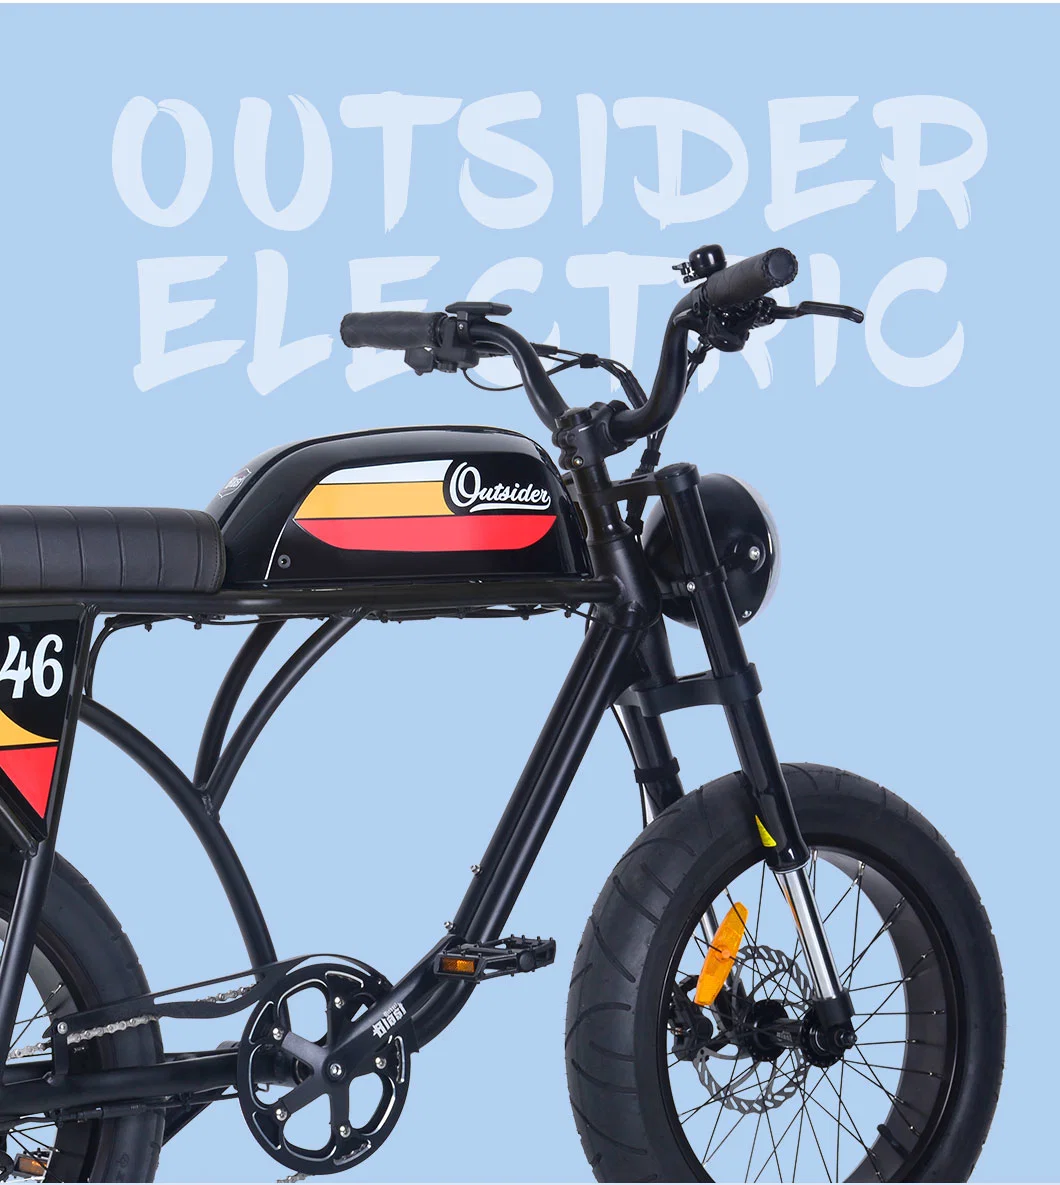 Electric Bicycles Can Save Energy Compared to Traditional Bicycles